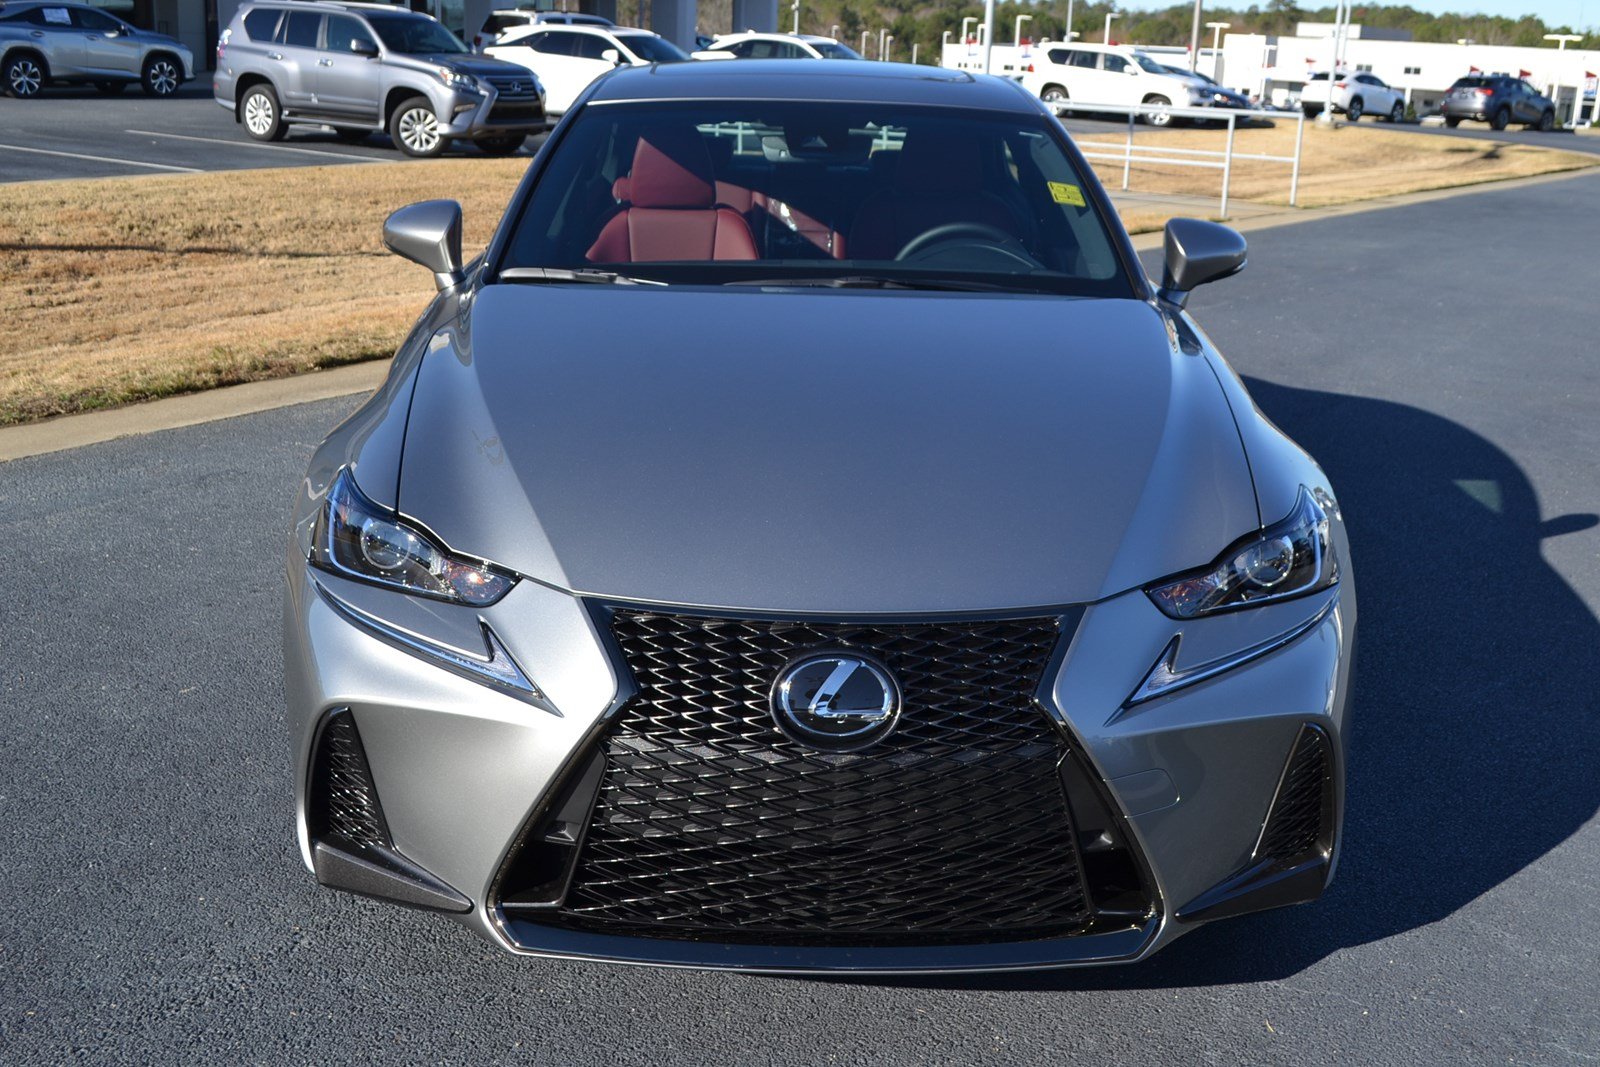 New 2020 Lexus IS 300 F SPORT 4dr Car in Macon L20180 Butler Auto Group